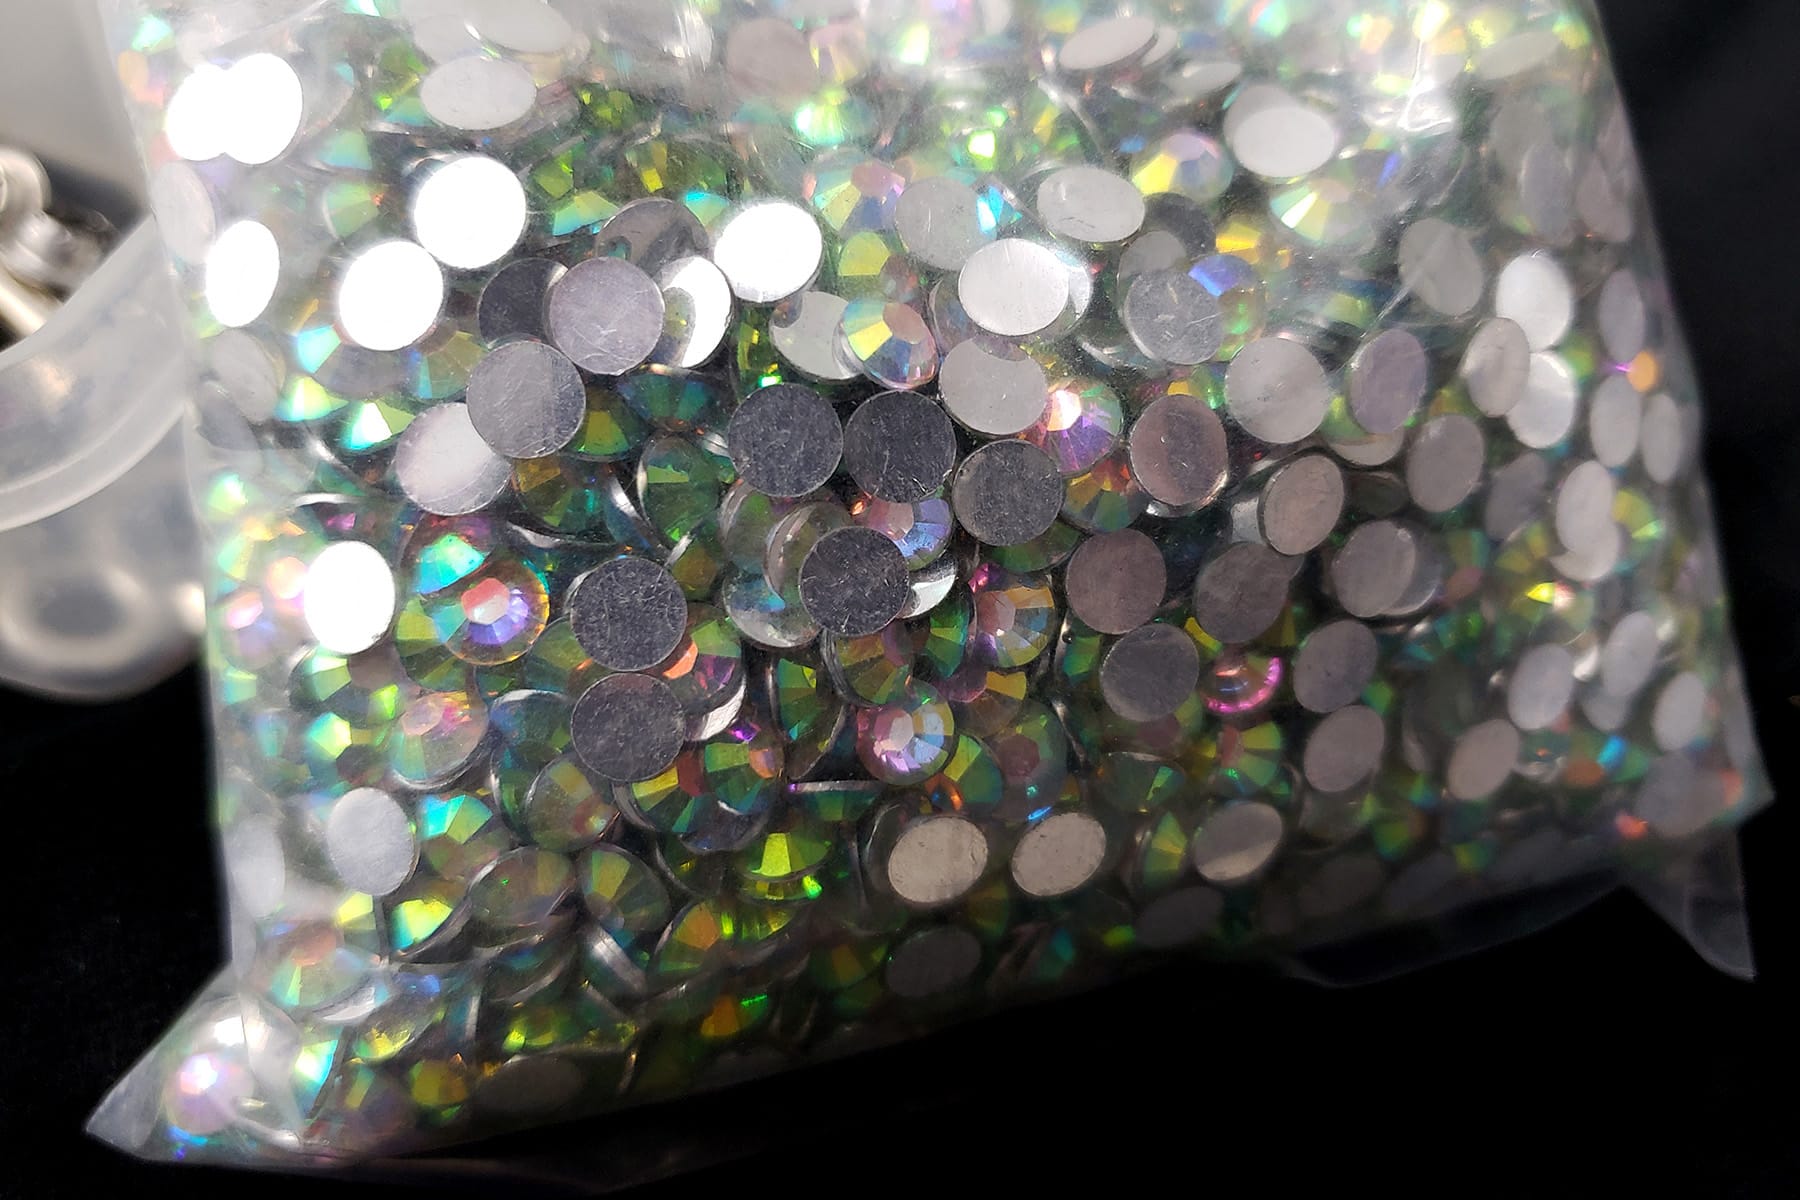 A close up view of a bag of green-tinged rhinestones.